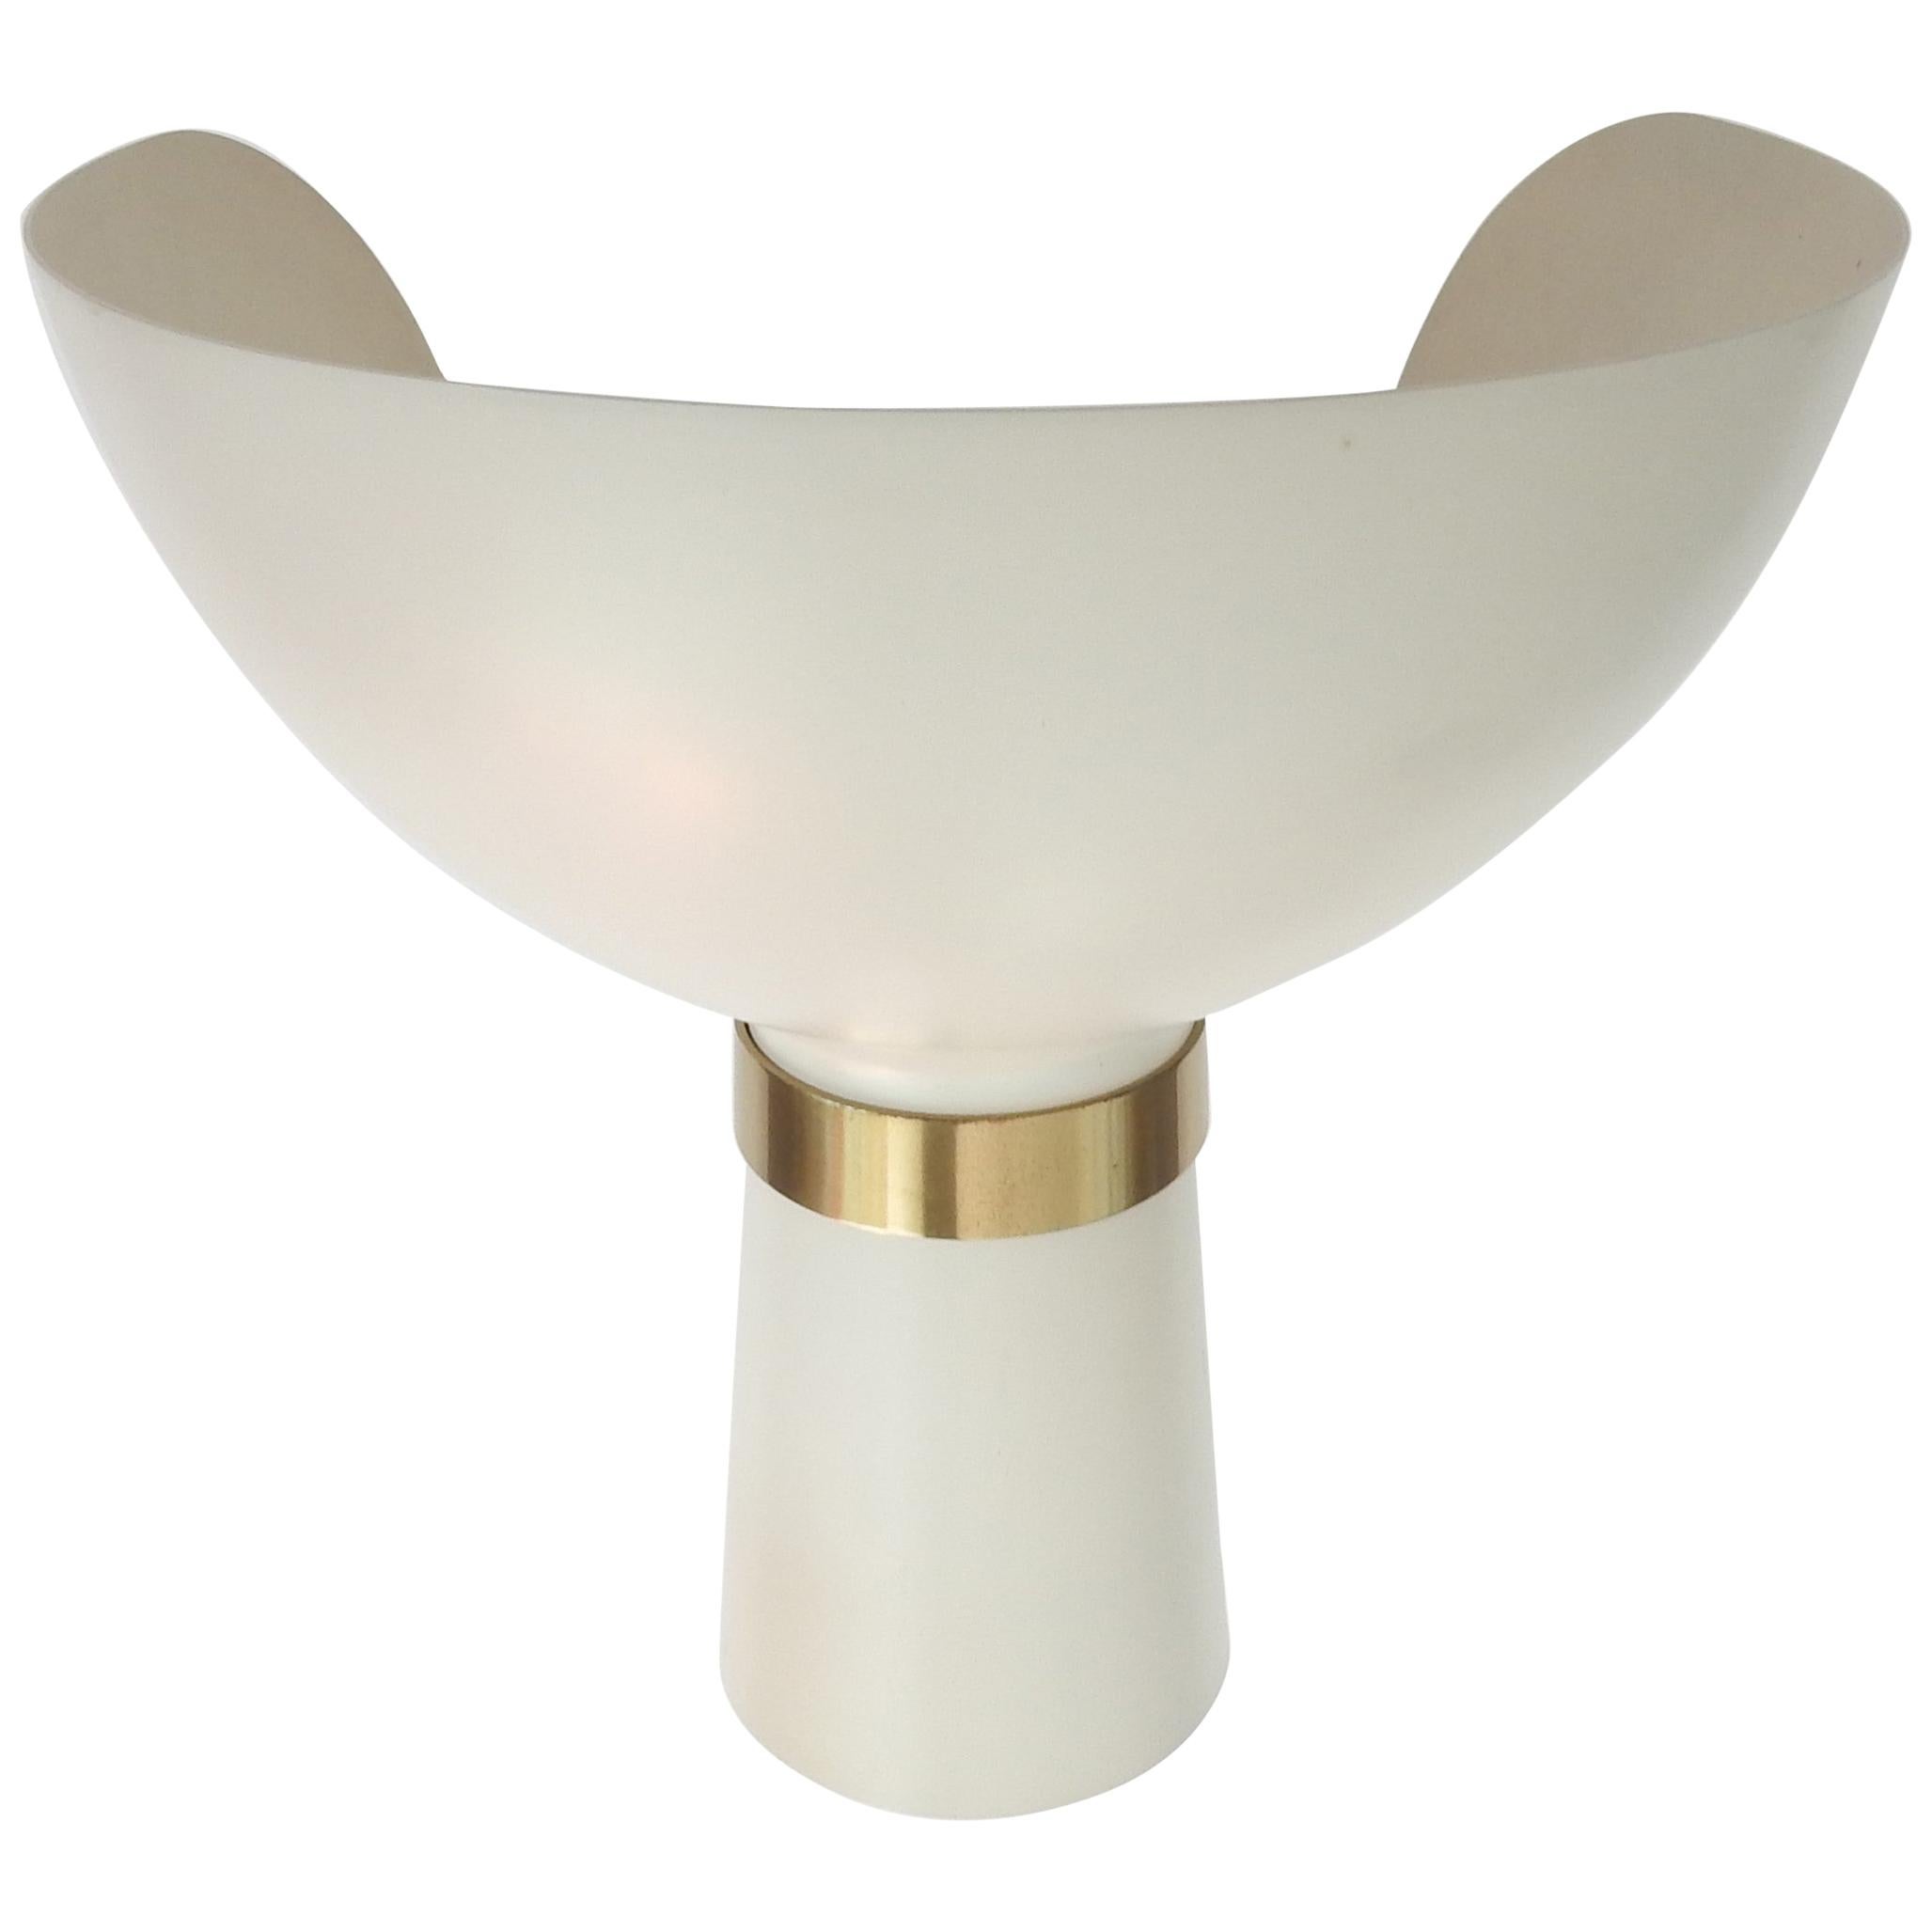 Cream Colored Metal and Brass Diabolo Shaped Wall Lamp, 1960s